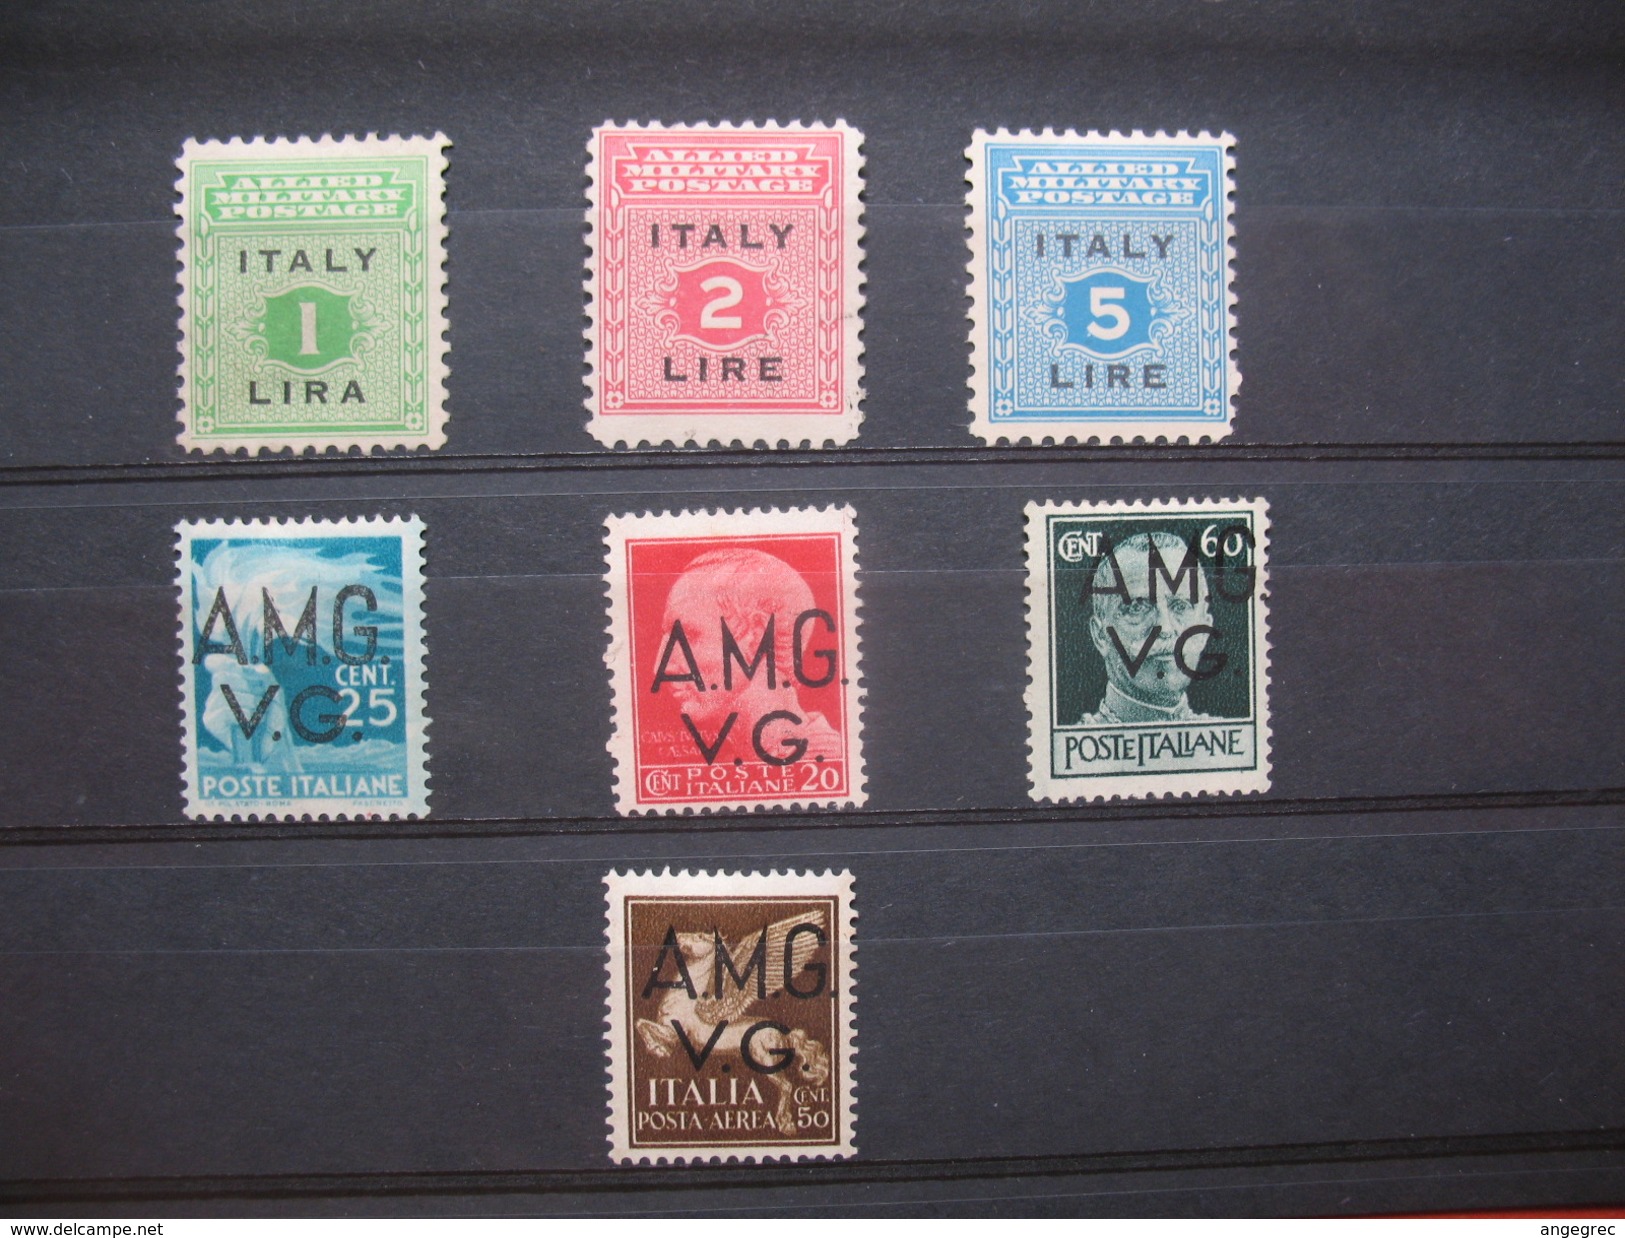 Italie Lot De 7 Timbres  AMG-VG  - Allied Military Governemt Venezia Guilia  Neuf* - Collections